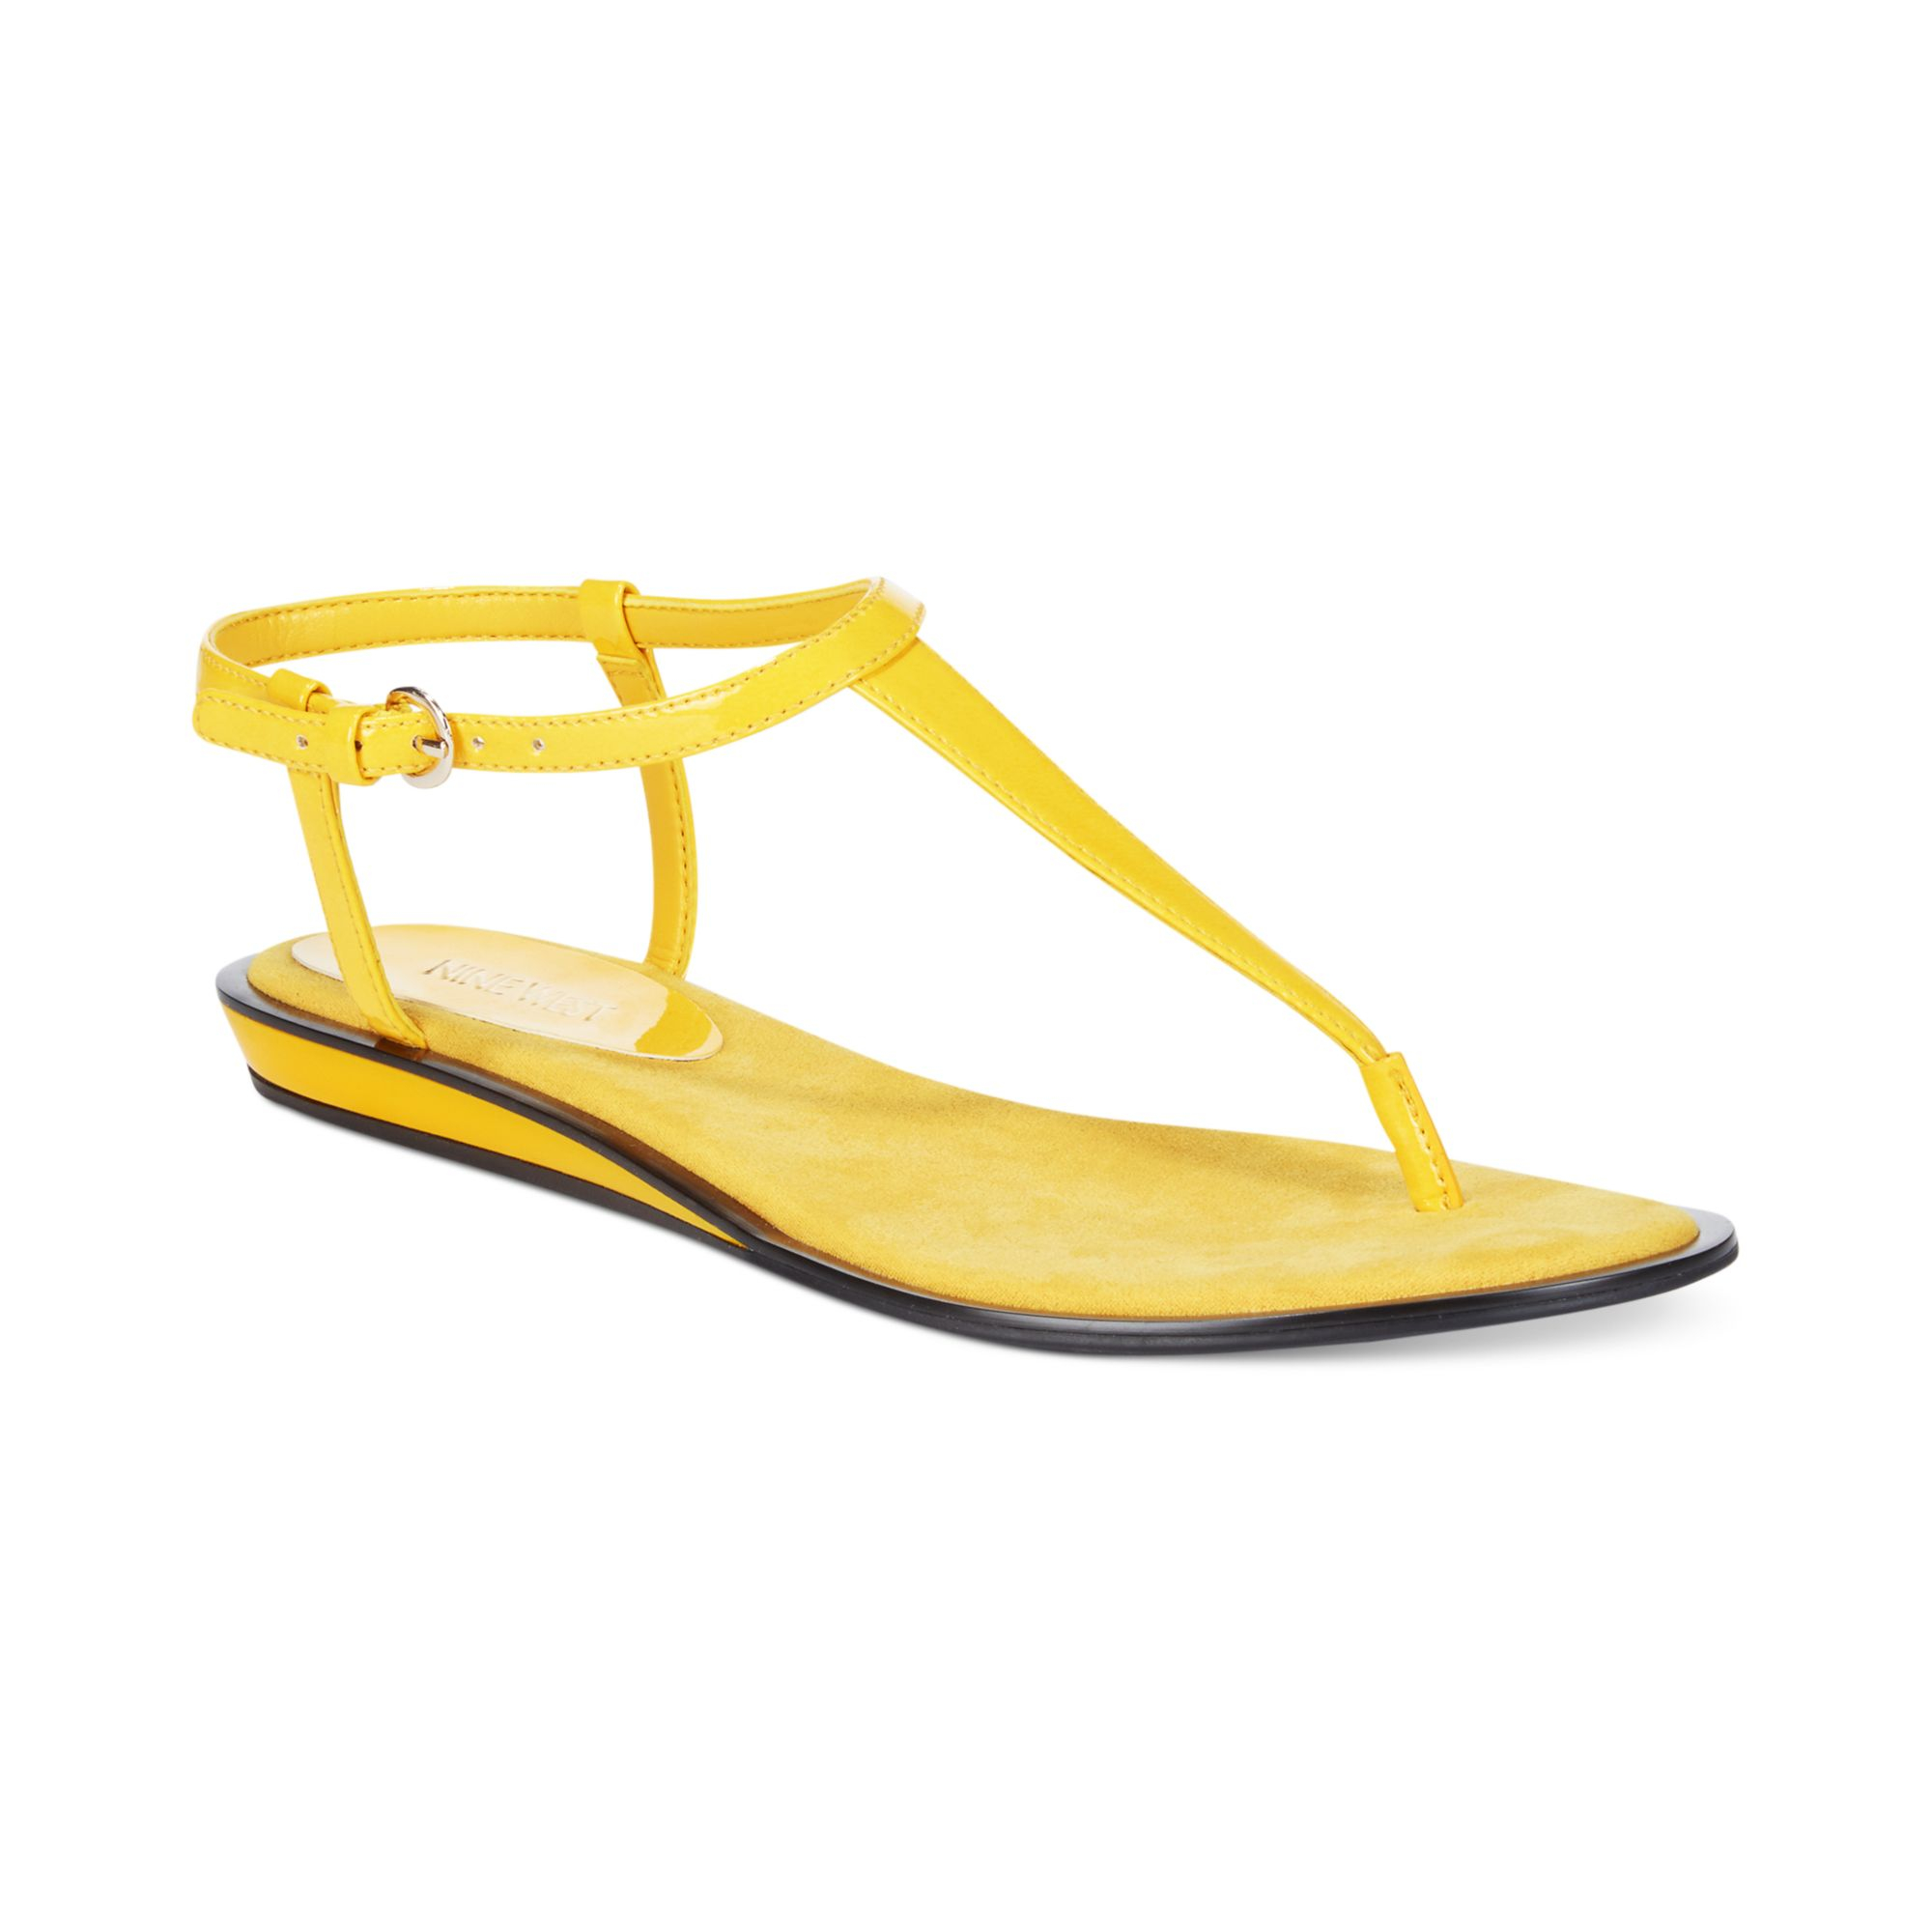 Nine West Venga Thong Sandals in Yellow | Lyst